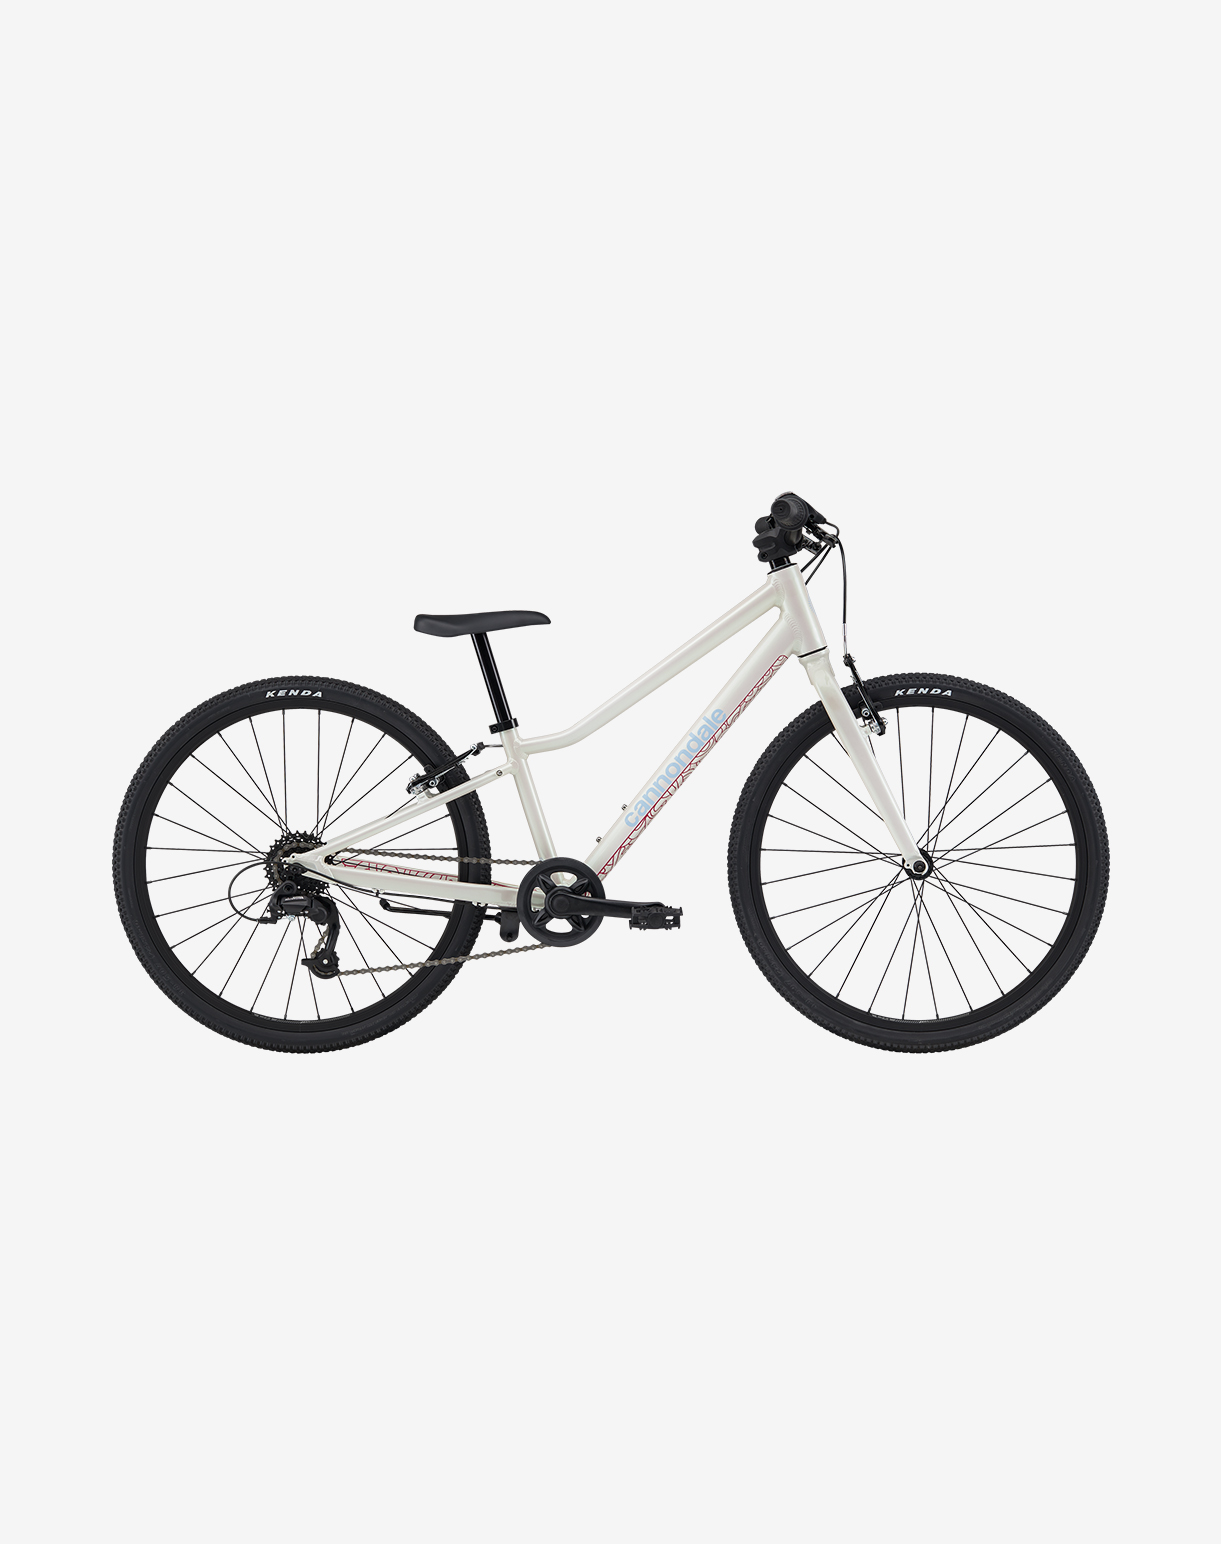 20 Inch Bikes | Ages 5-8 | Cannondale